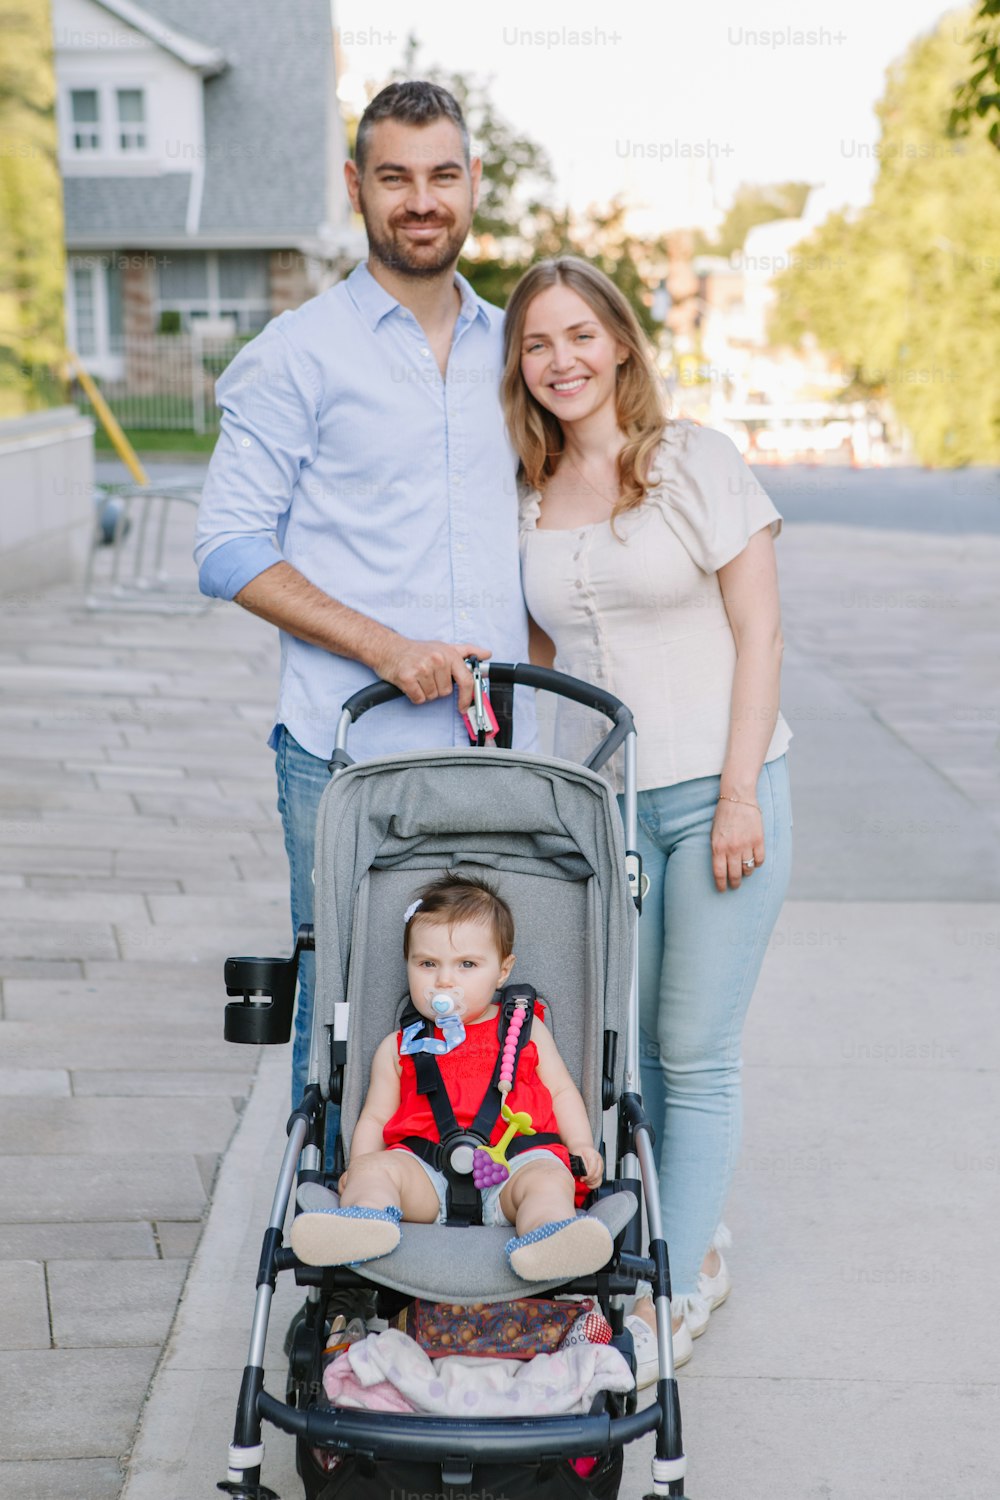 Caucasian mother and father walking with baby daughter in stroller. Family strolling together outdoor on city street on summer day. Urban life with kids children. Happy lifestyle family.